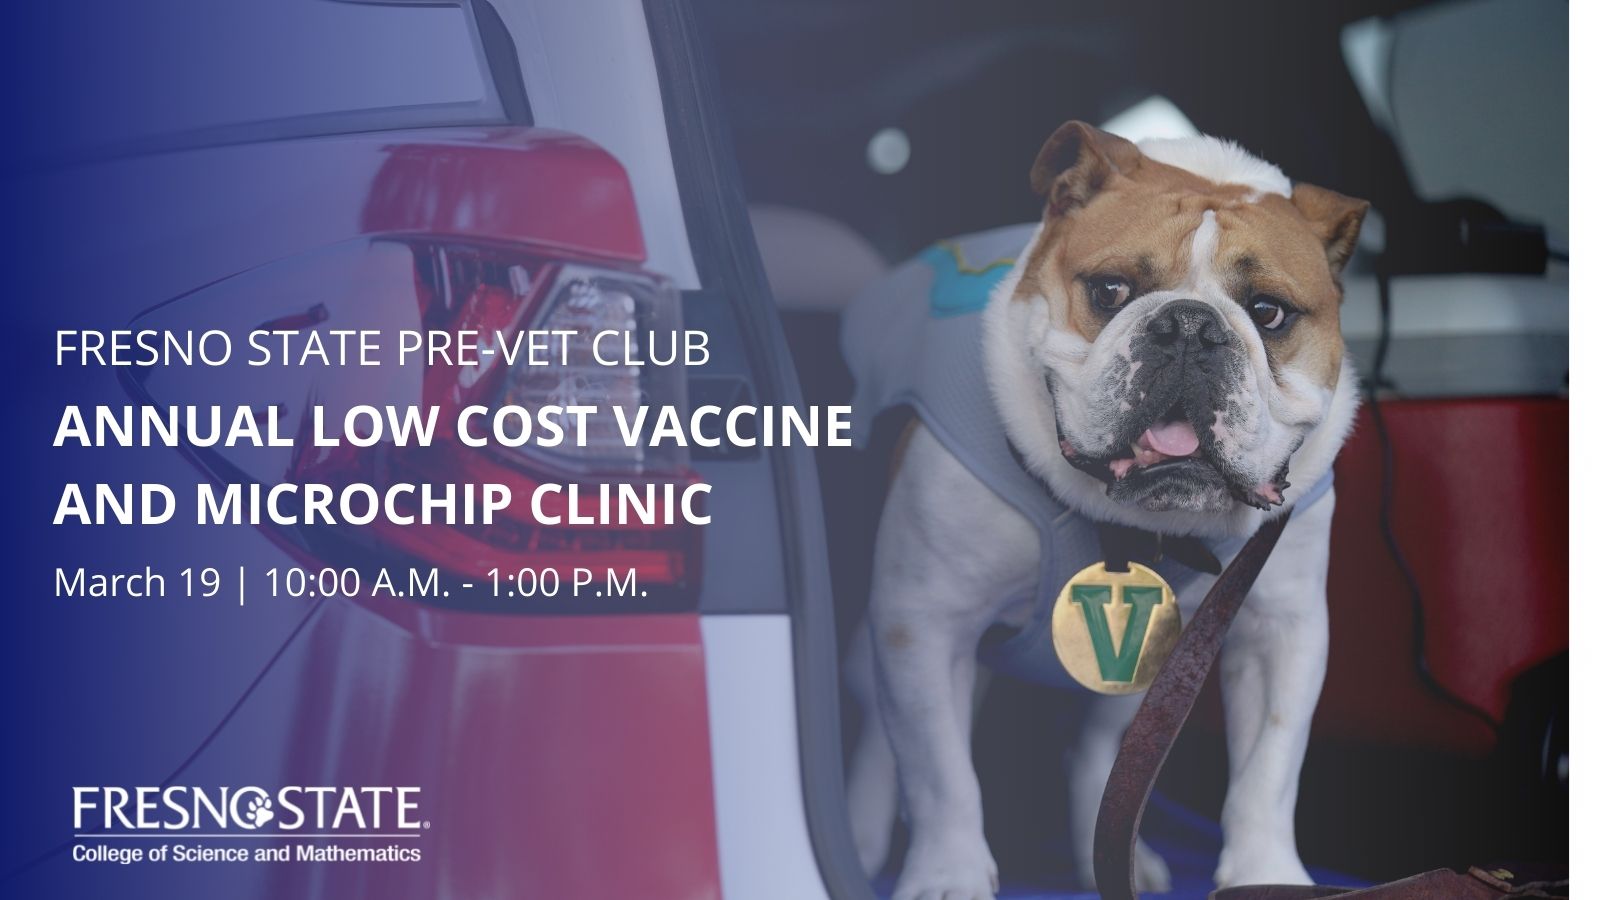 Annual Low Cost Vaccine and Microchip Clinic